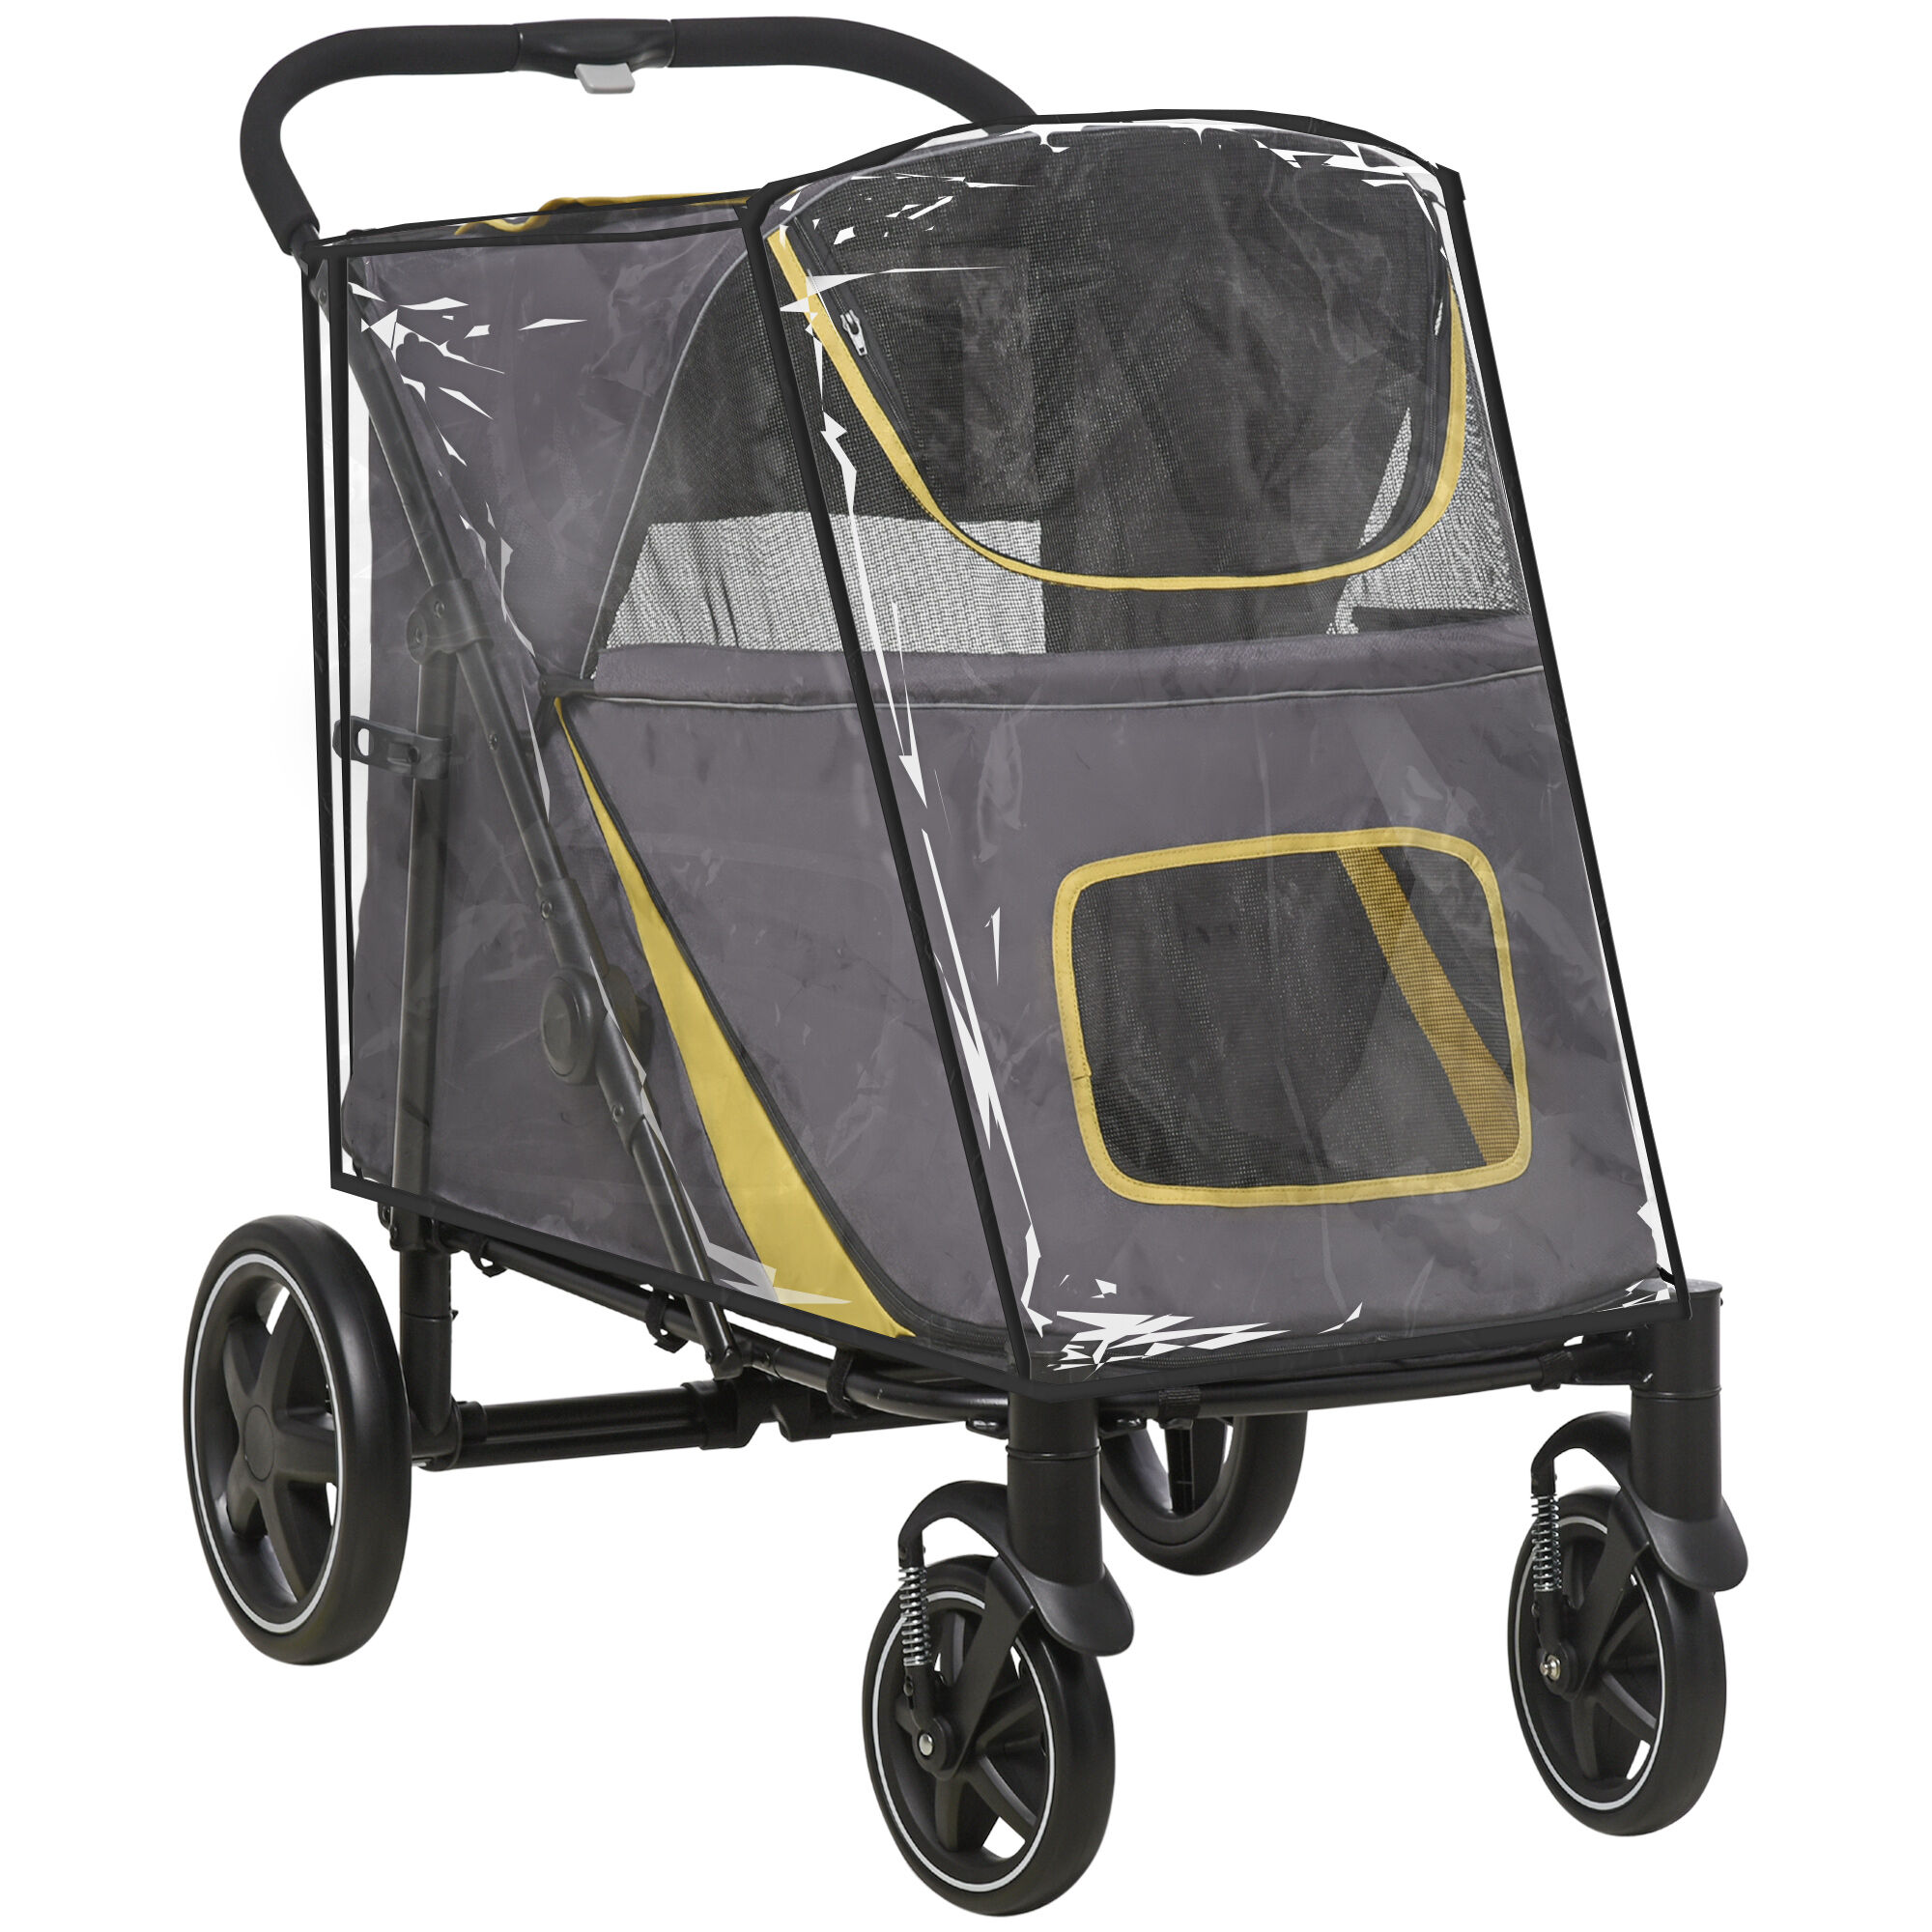 PawHut Foldable Pet Stroller with One-Click, Rain Cover, Front Wheels, Shock Absorber, Storage, Mesh for Cats & Dogs